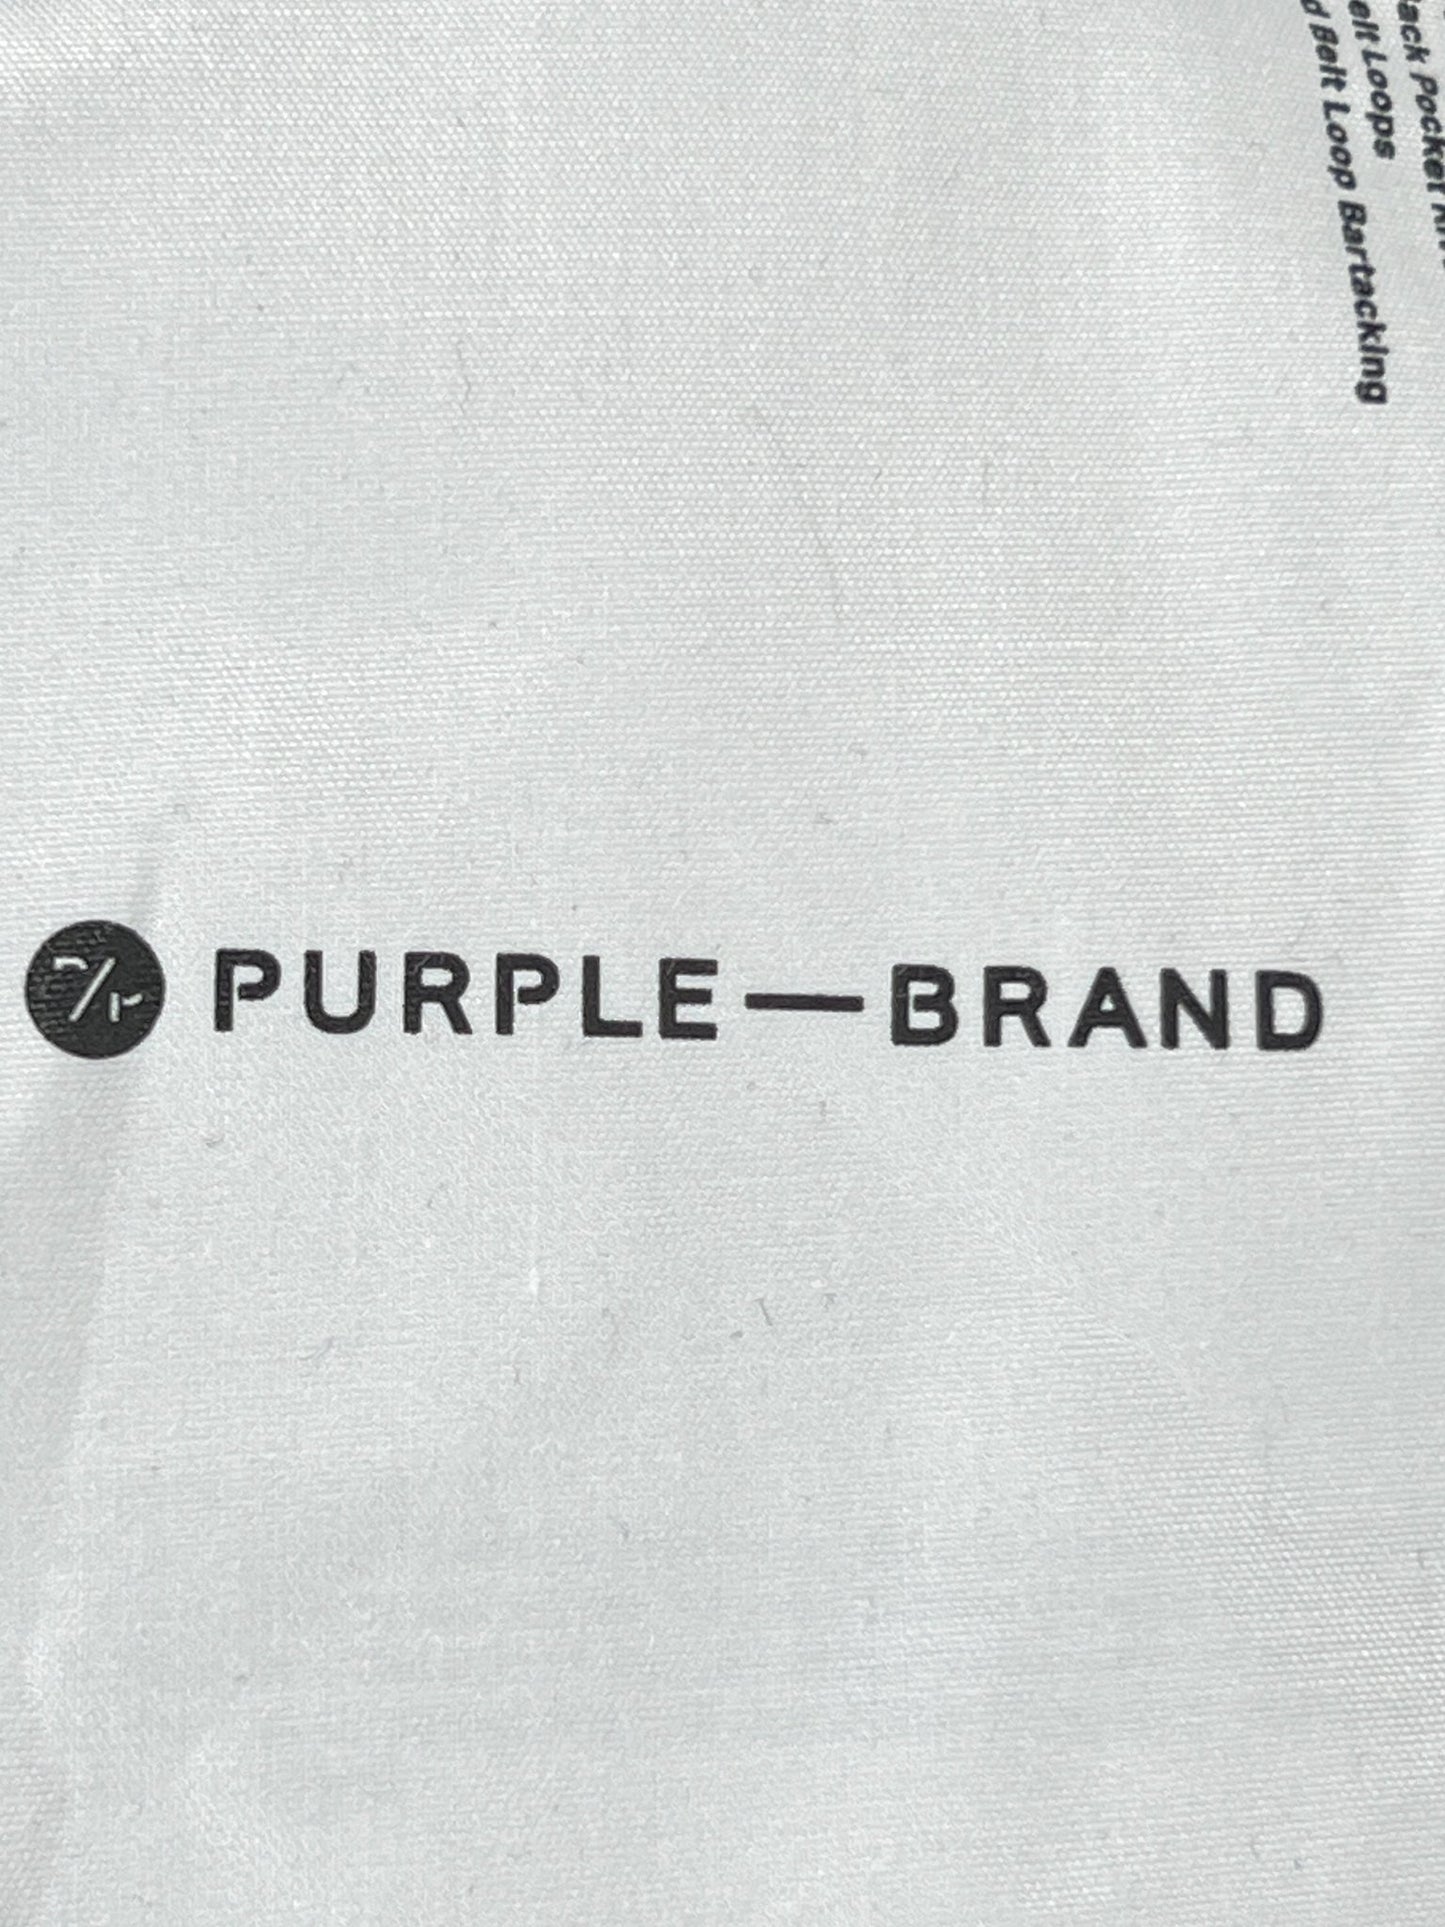 The PURPLE BRAND P004-FFBL FLAMED FLARE BLACK logo with a flame graphic on a white bag.